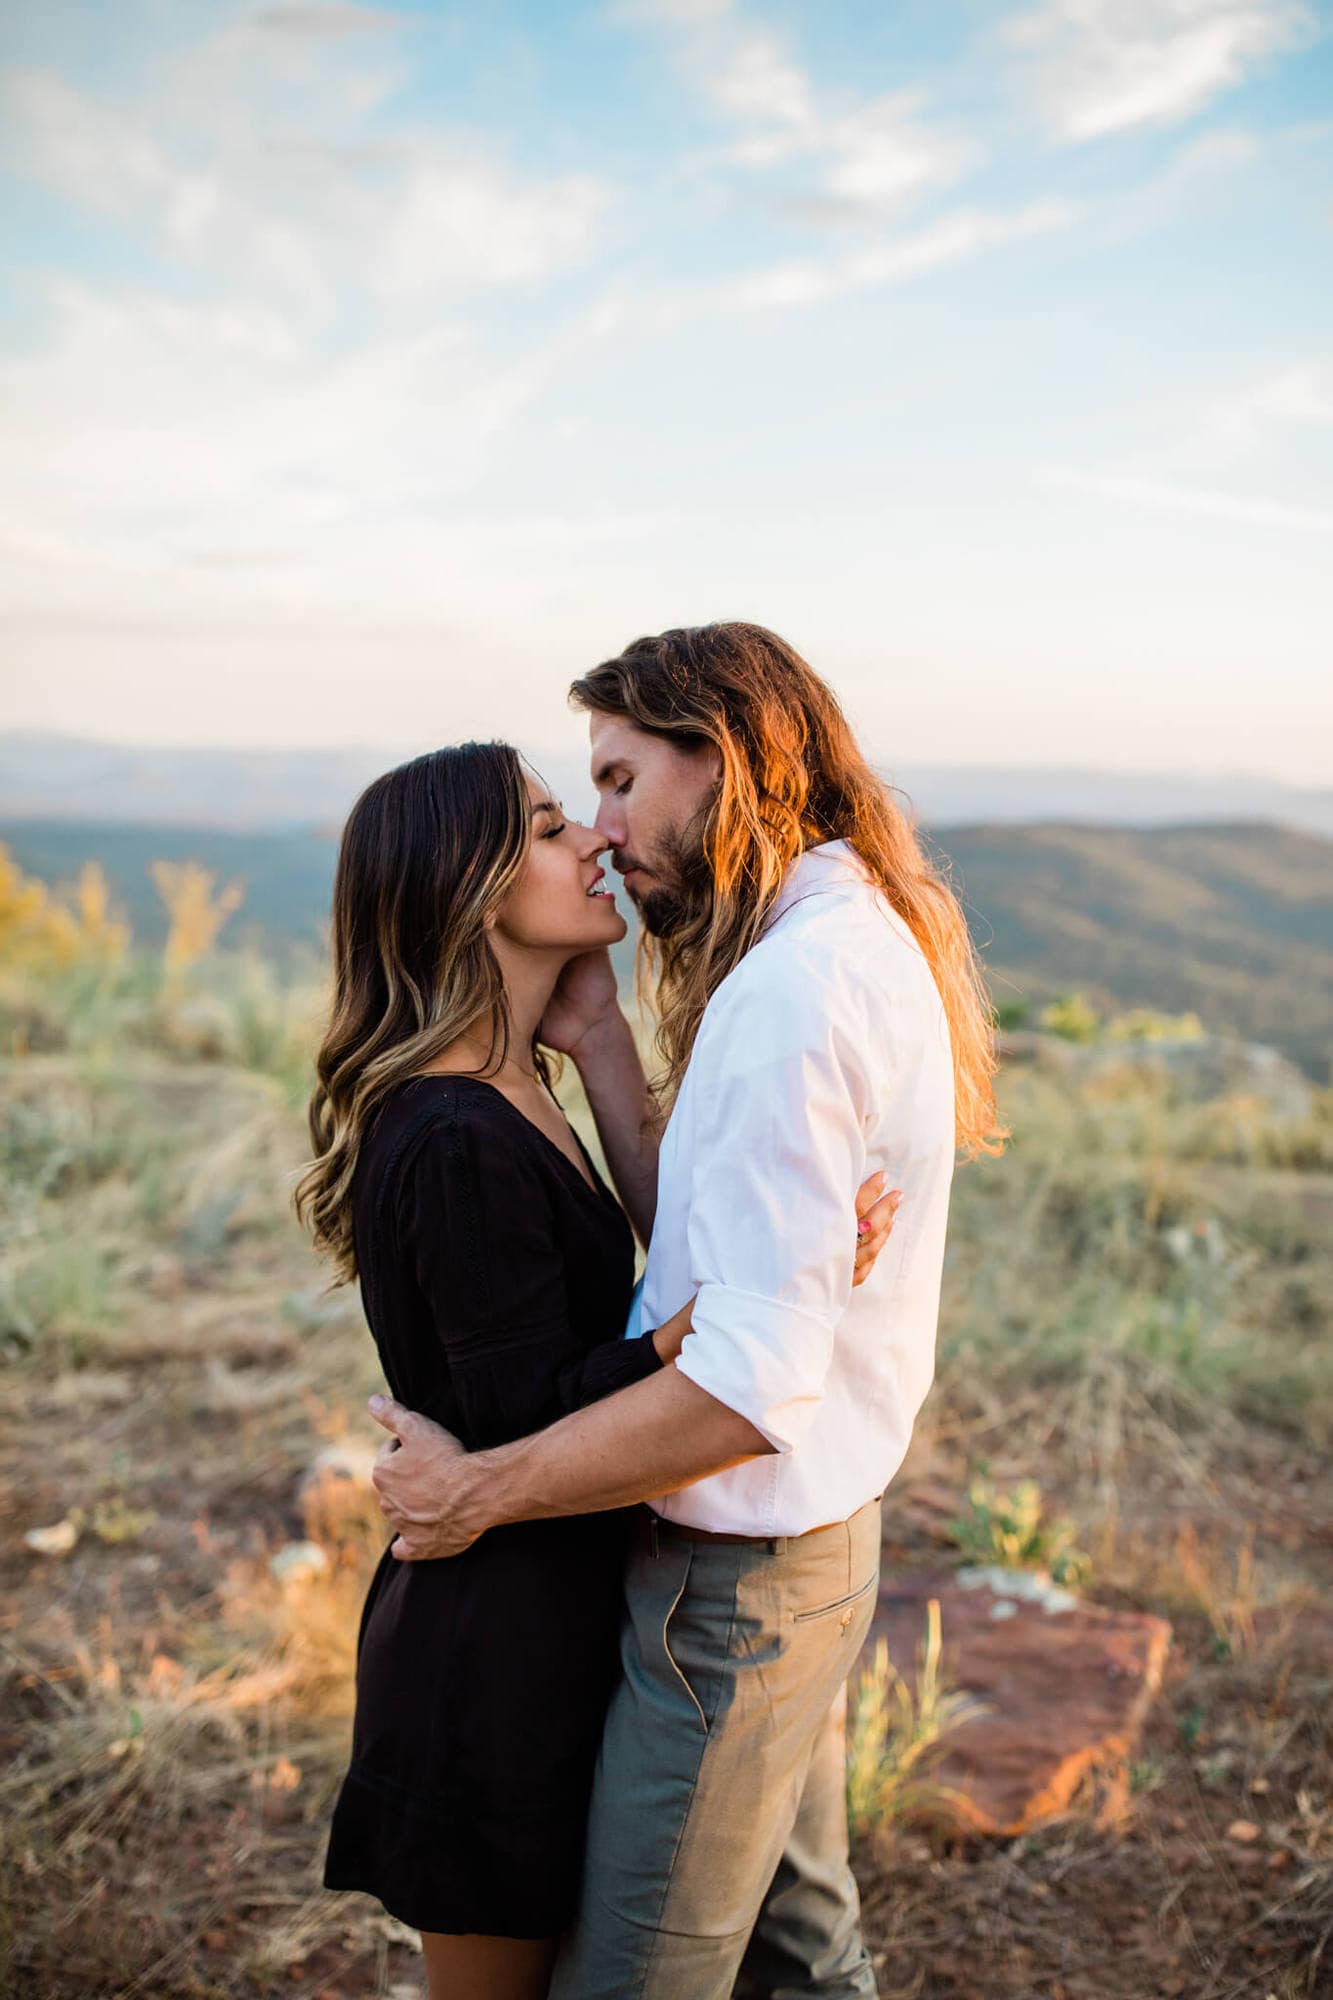 Leah and David stand at the edge of the Mogollon Rim for the epic forest engagement photos.